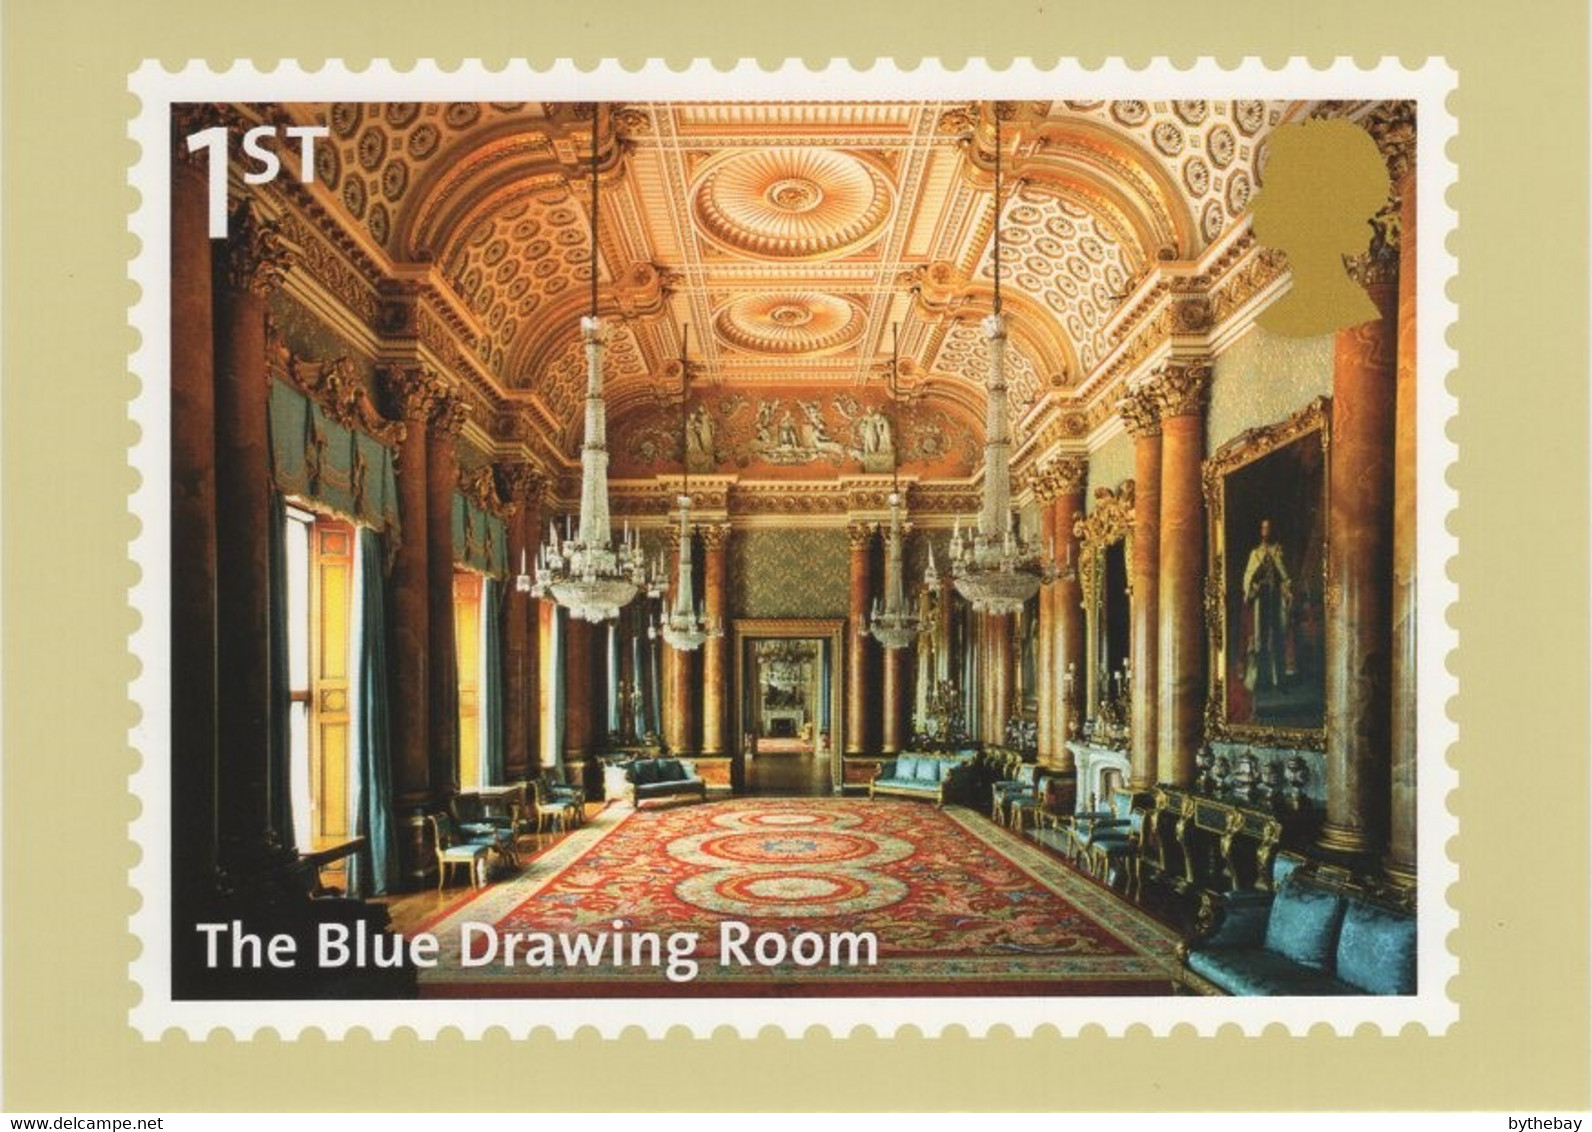 Great Britain 2014 PHQ Card Sc 3285b 1st The Blue Drawing Room Buckingham Palace - PHQ Cards